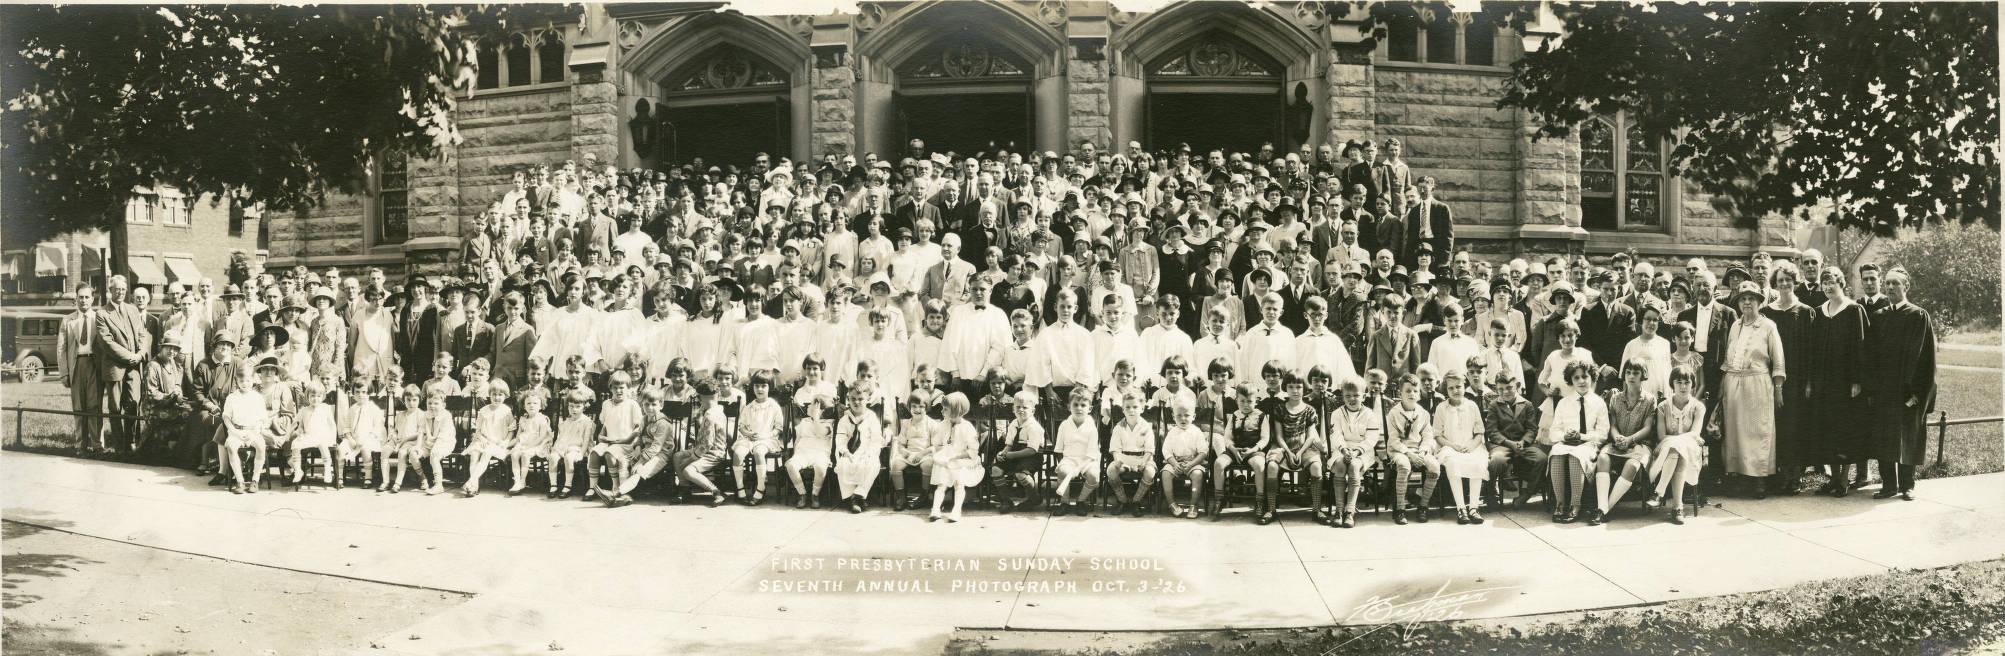 A group of people are gathered for a photograph outside of a church building. 